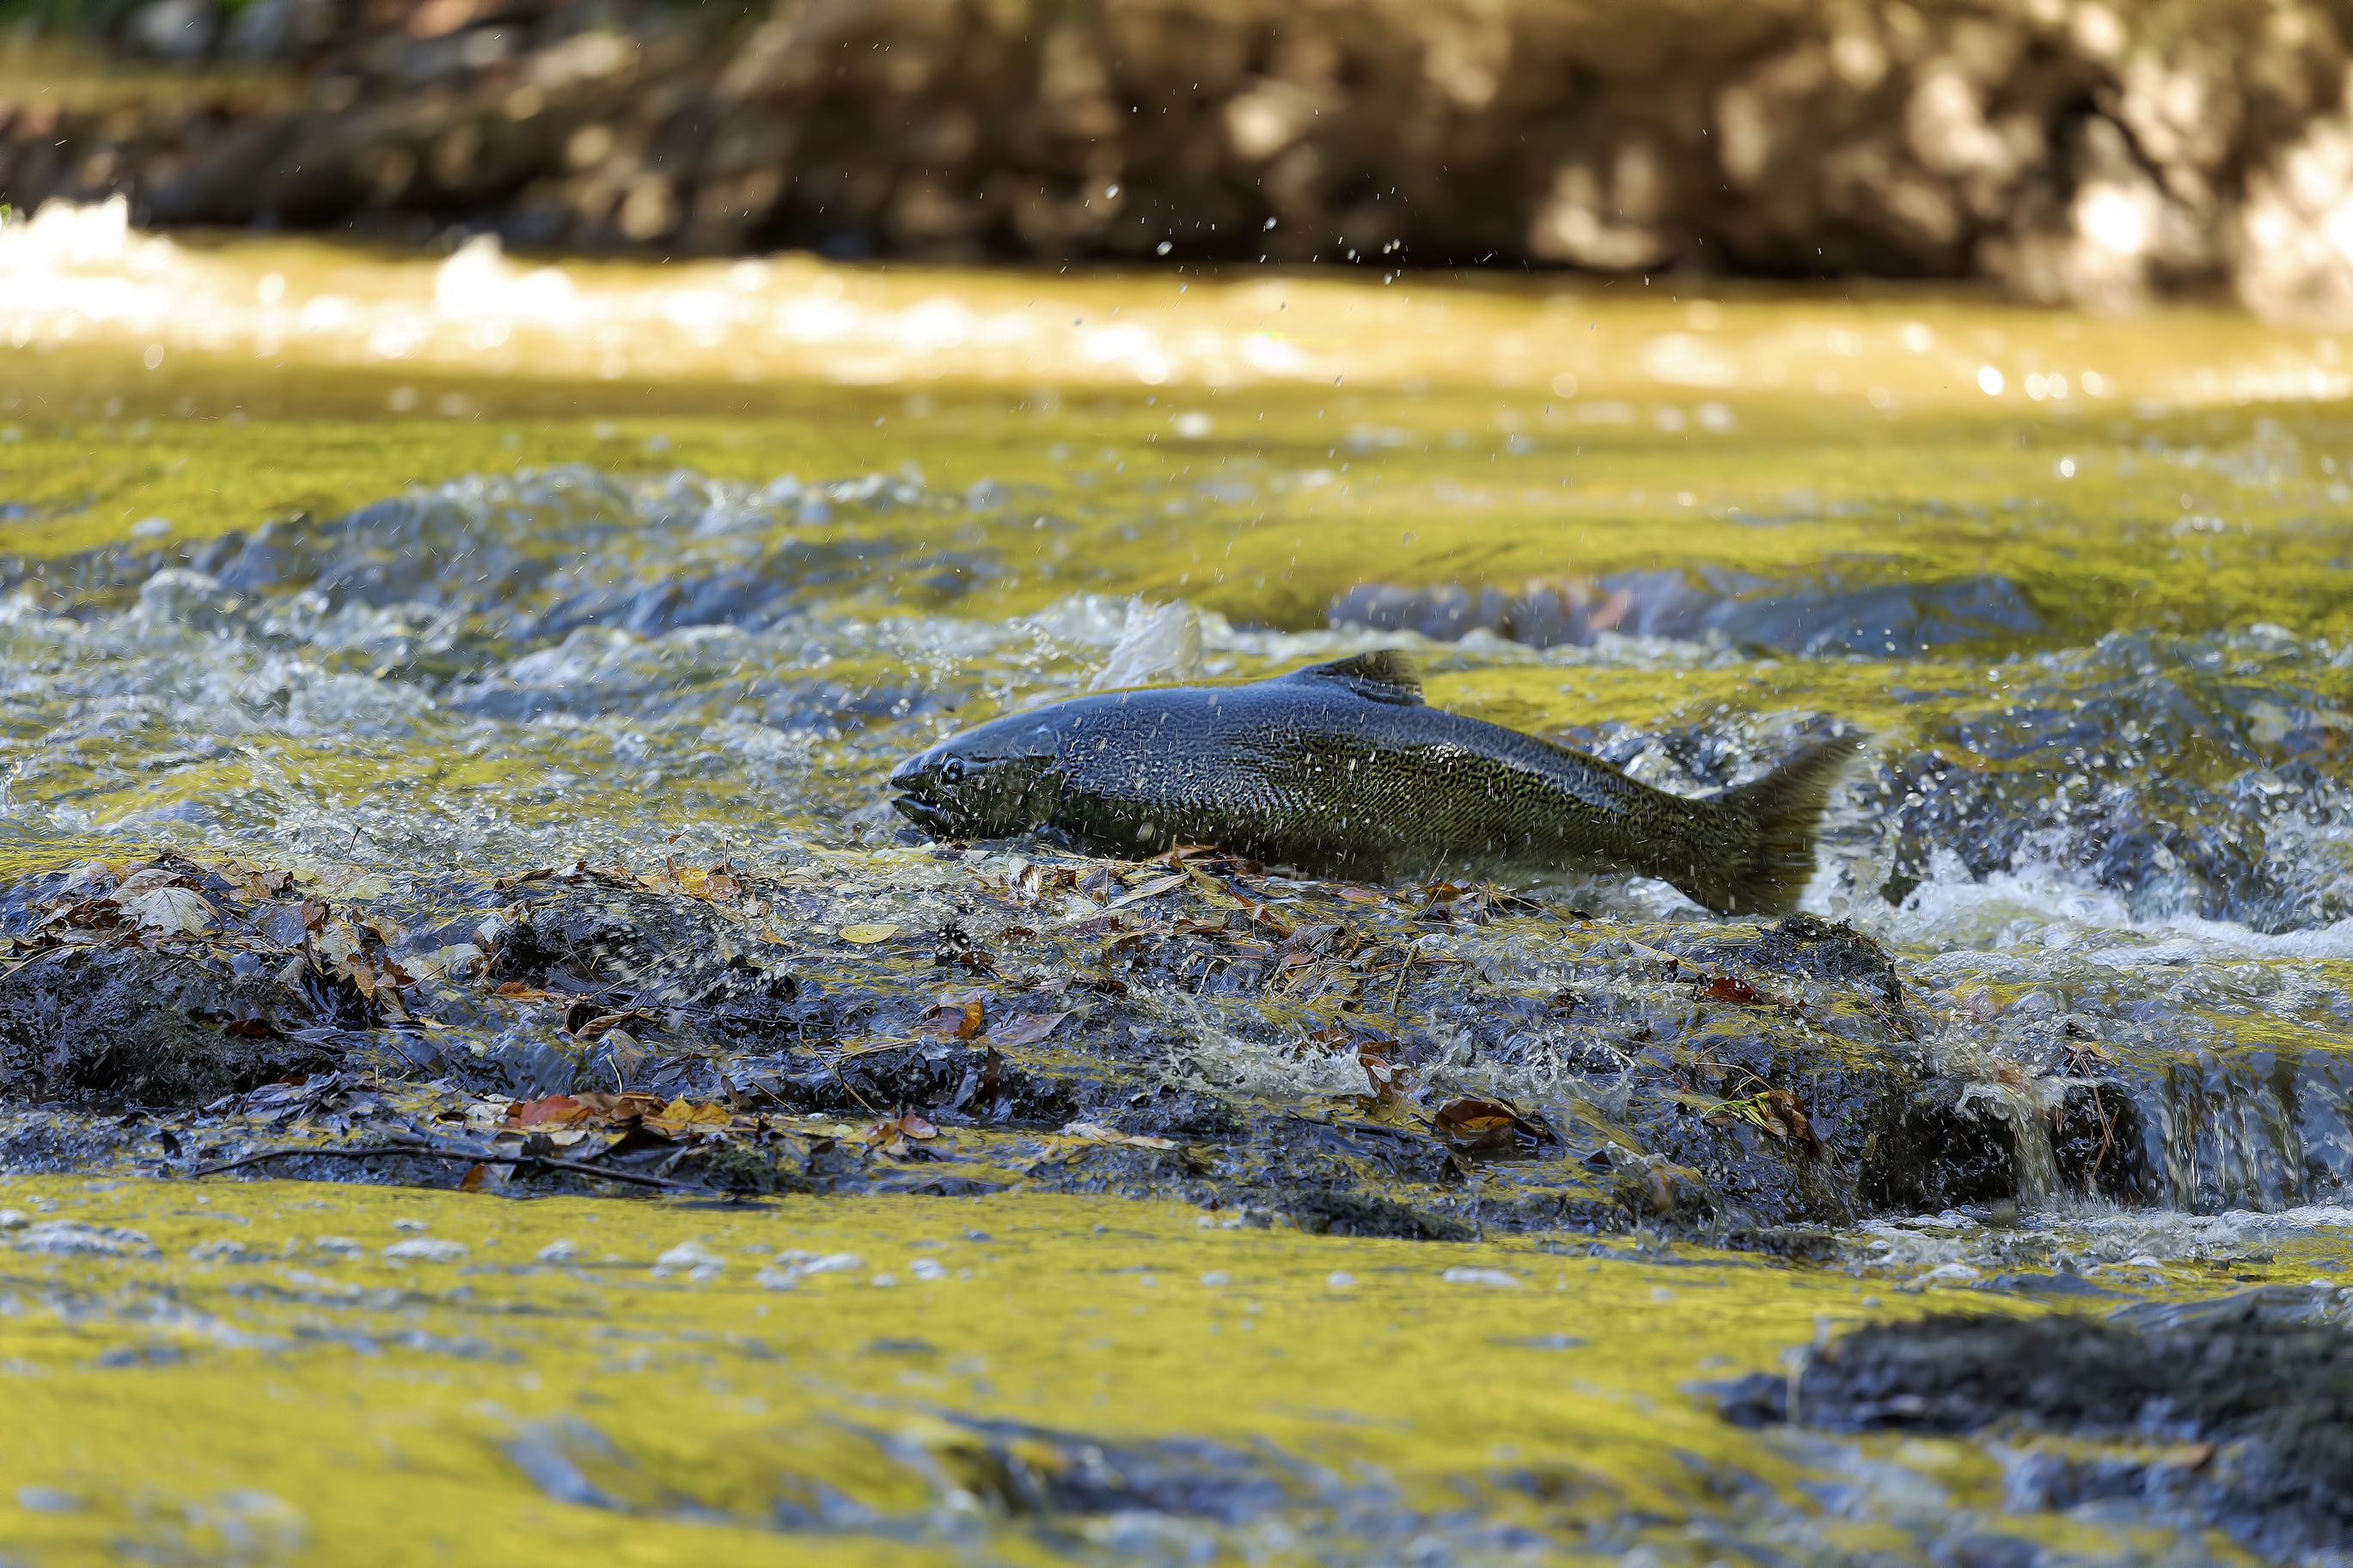 A chinook salmon leaping from the water in a river.